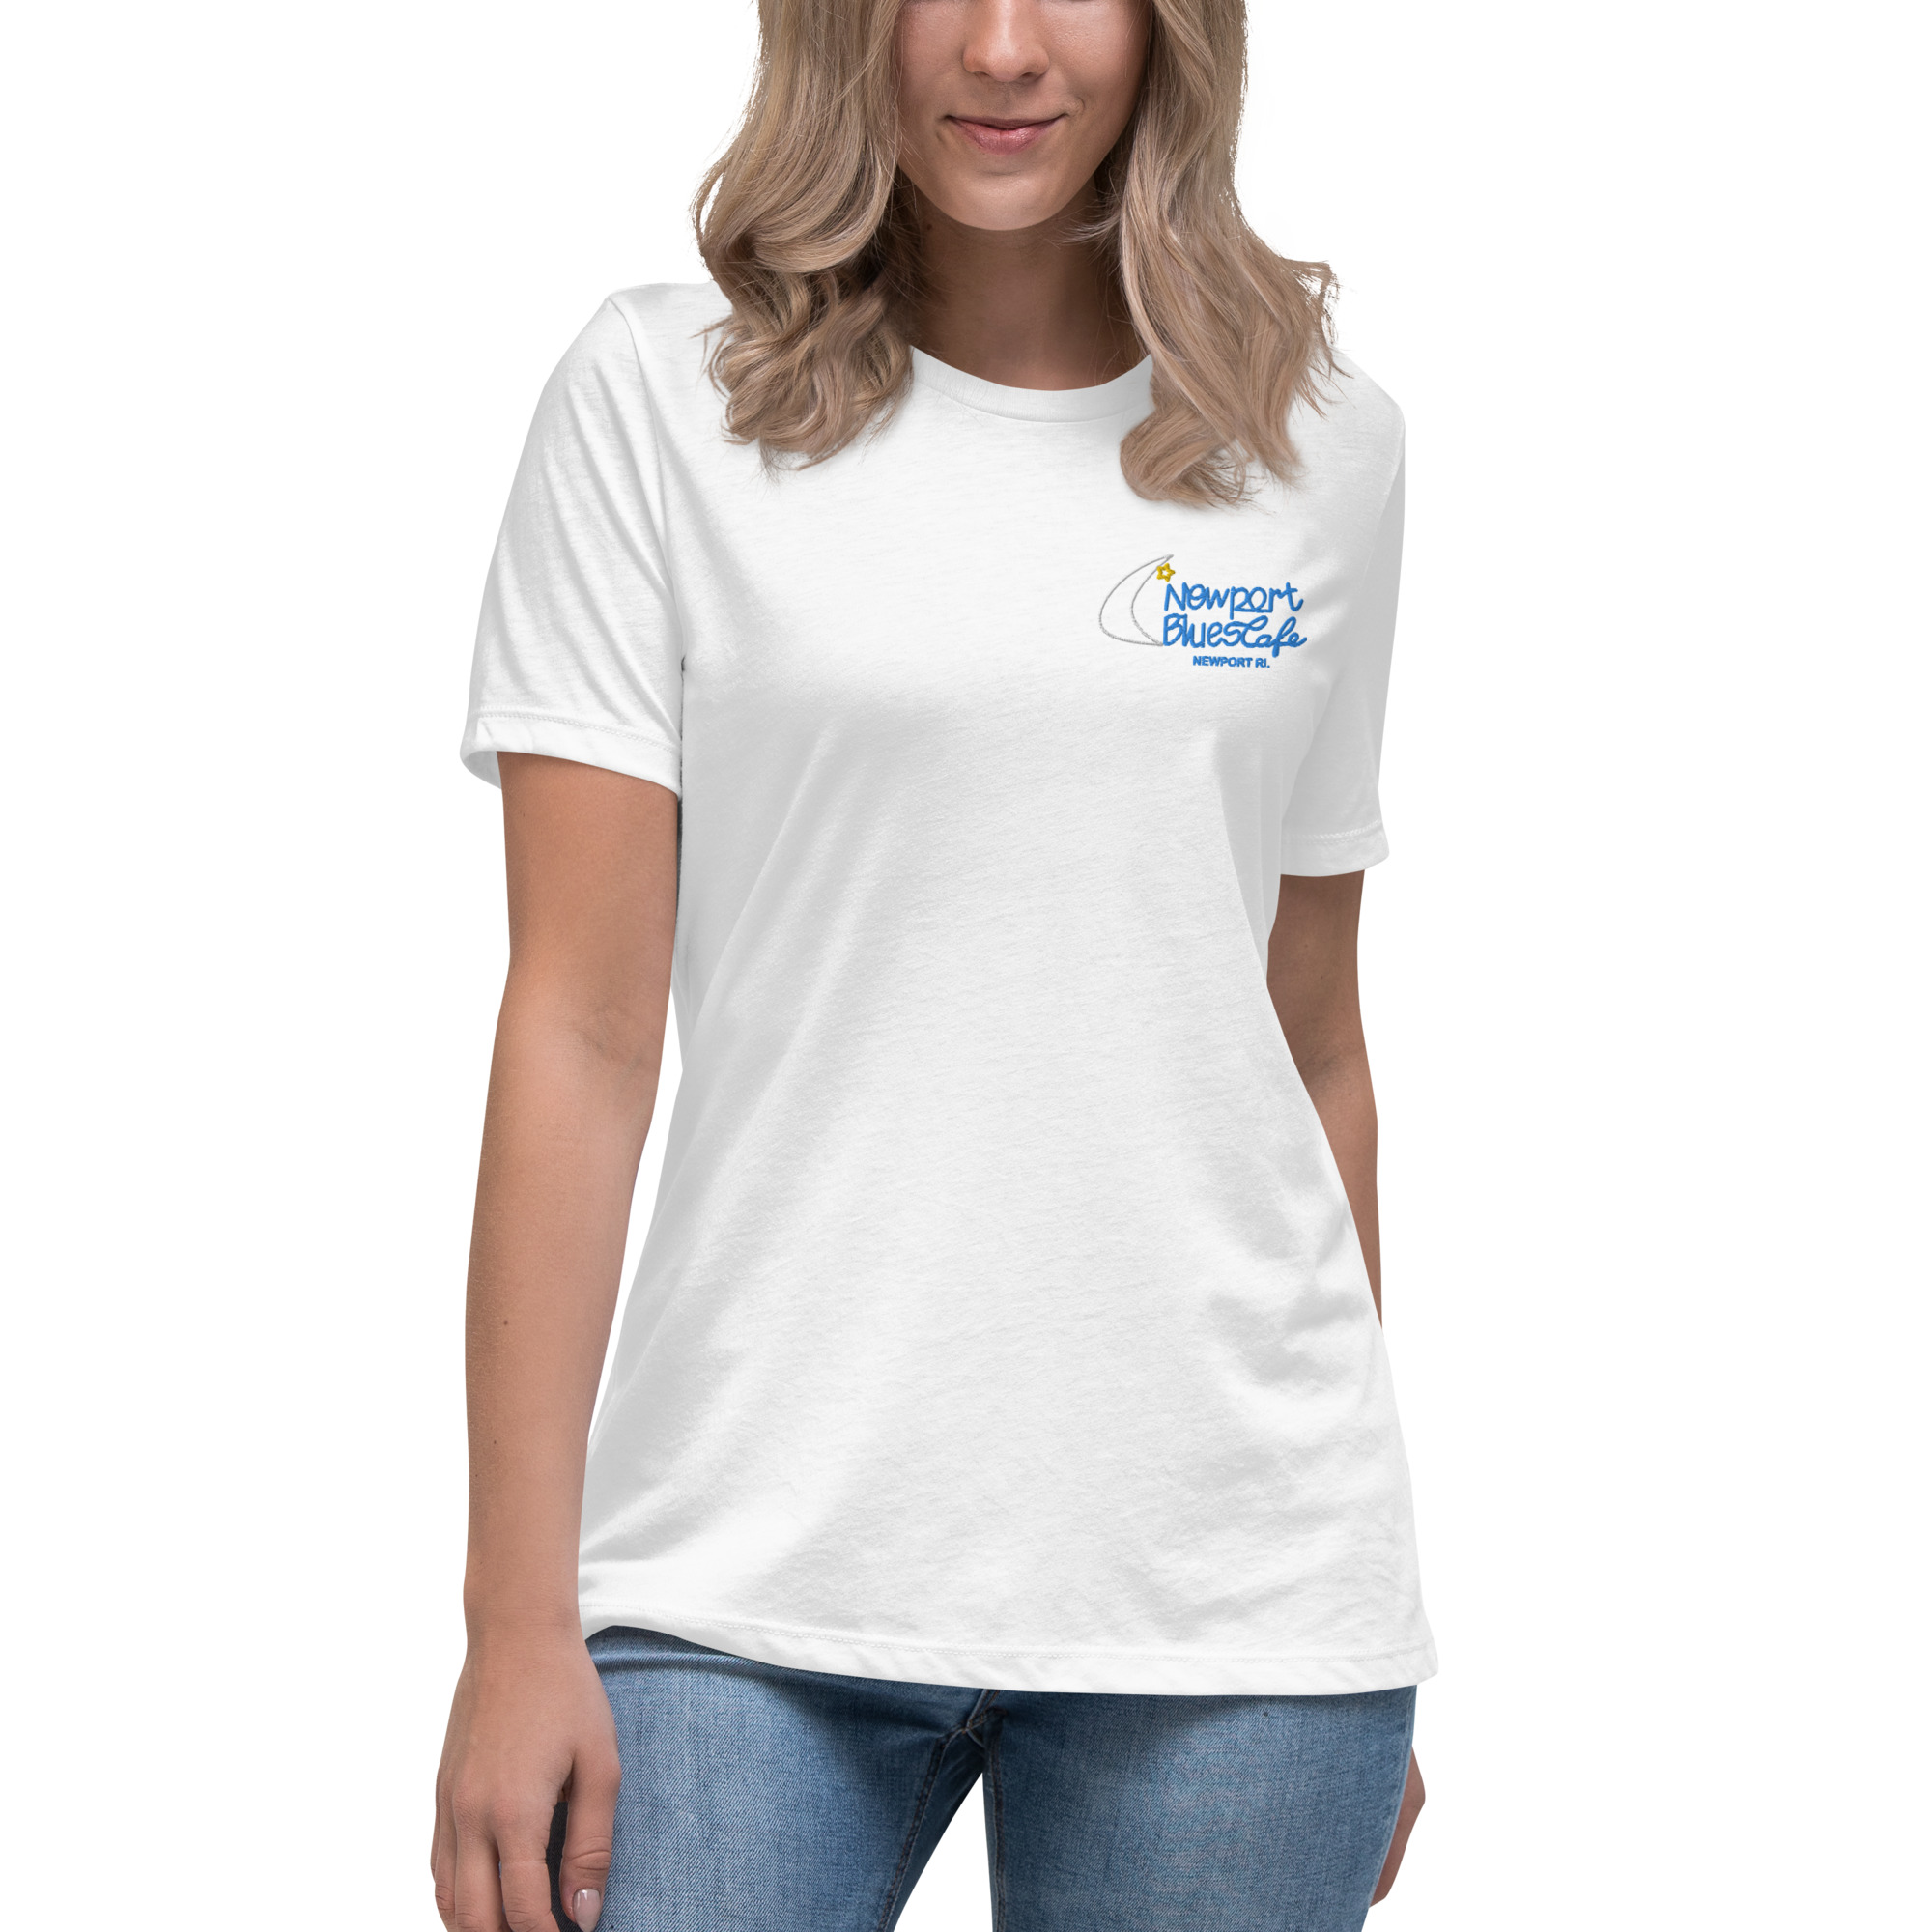 Women's Relaxed Embroidered T-Shirt - Newport Blues Cafe